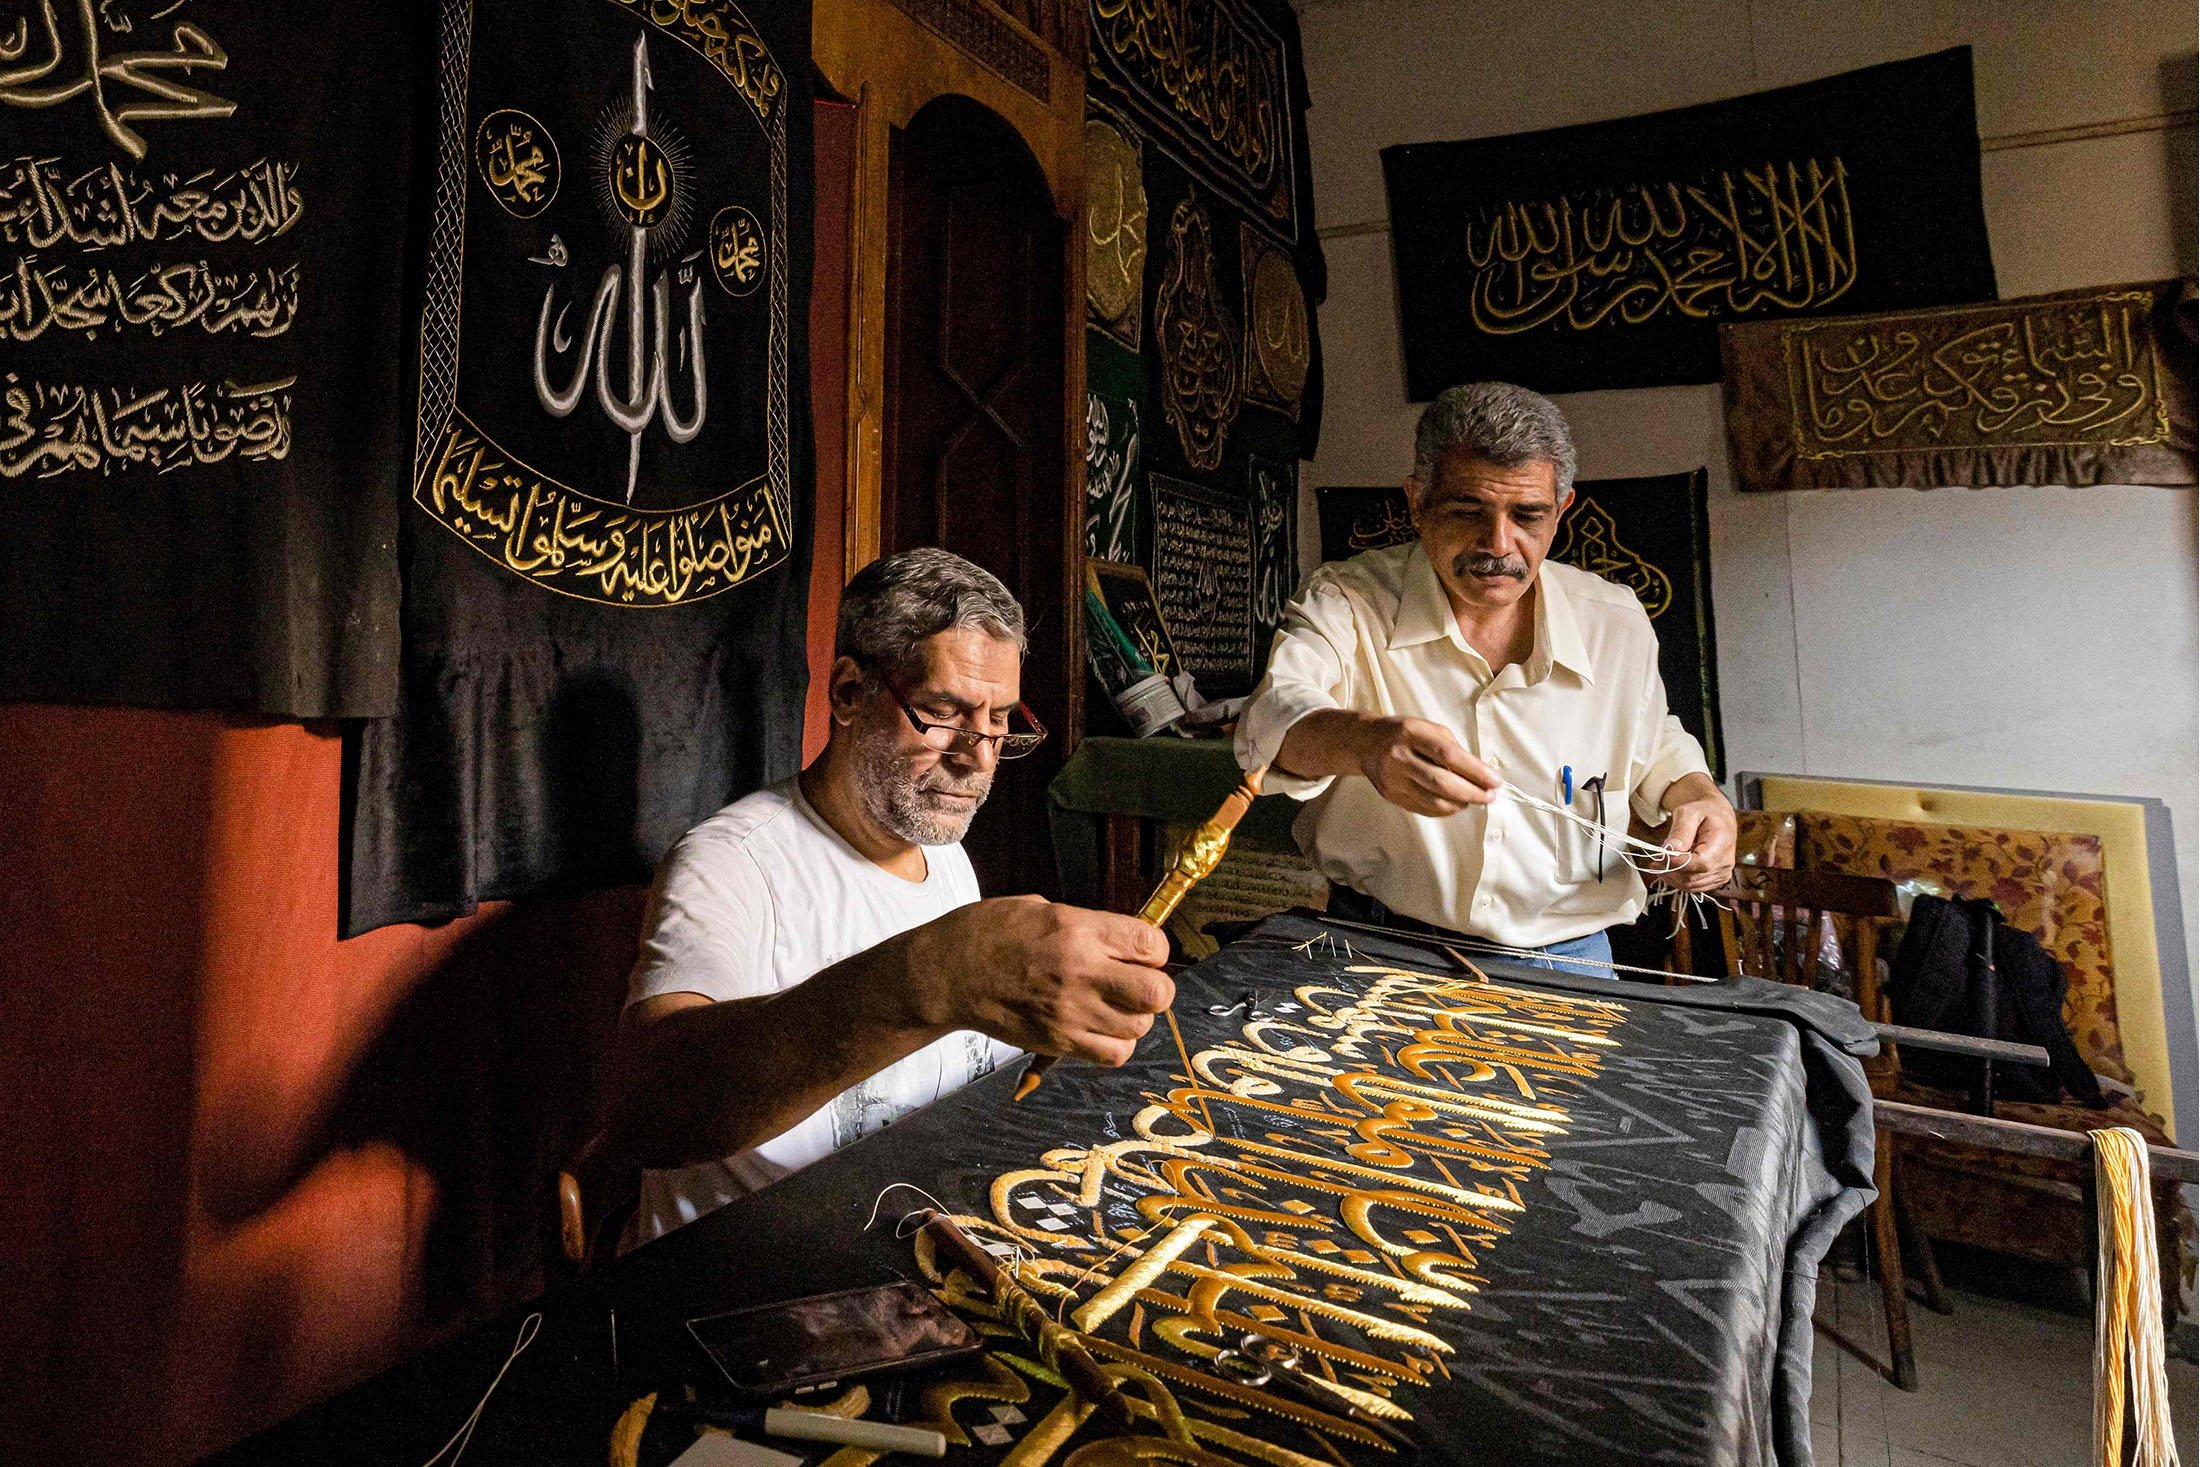 Egyptian embroiderer Ahmed Othman el-Kassabgy (R) supervises as another employee (L) sews with gold thread a verse from the Quran onto a replica drape to be sold as a souvenir for tourists visiting Cairo, Egypt, June 15, 2022. (AFP Photo)